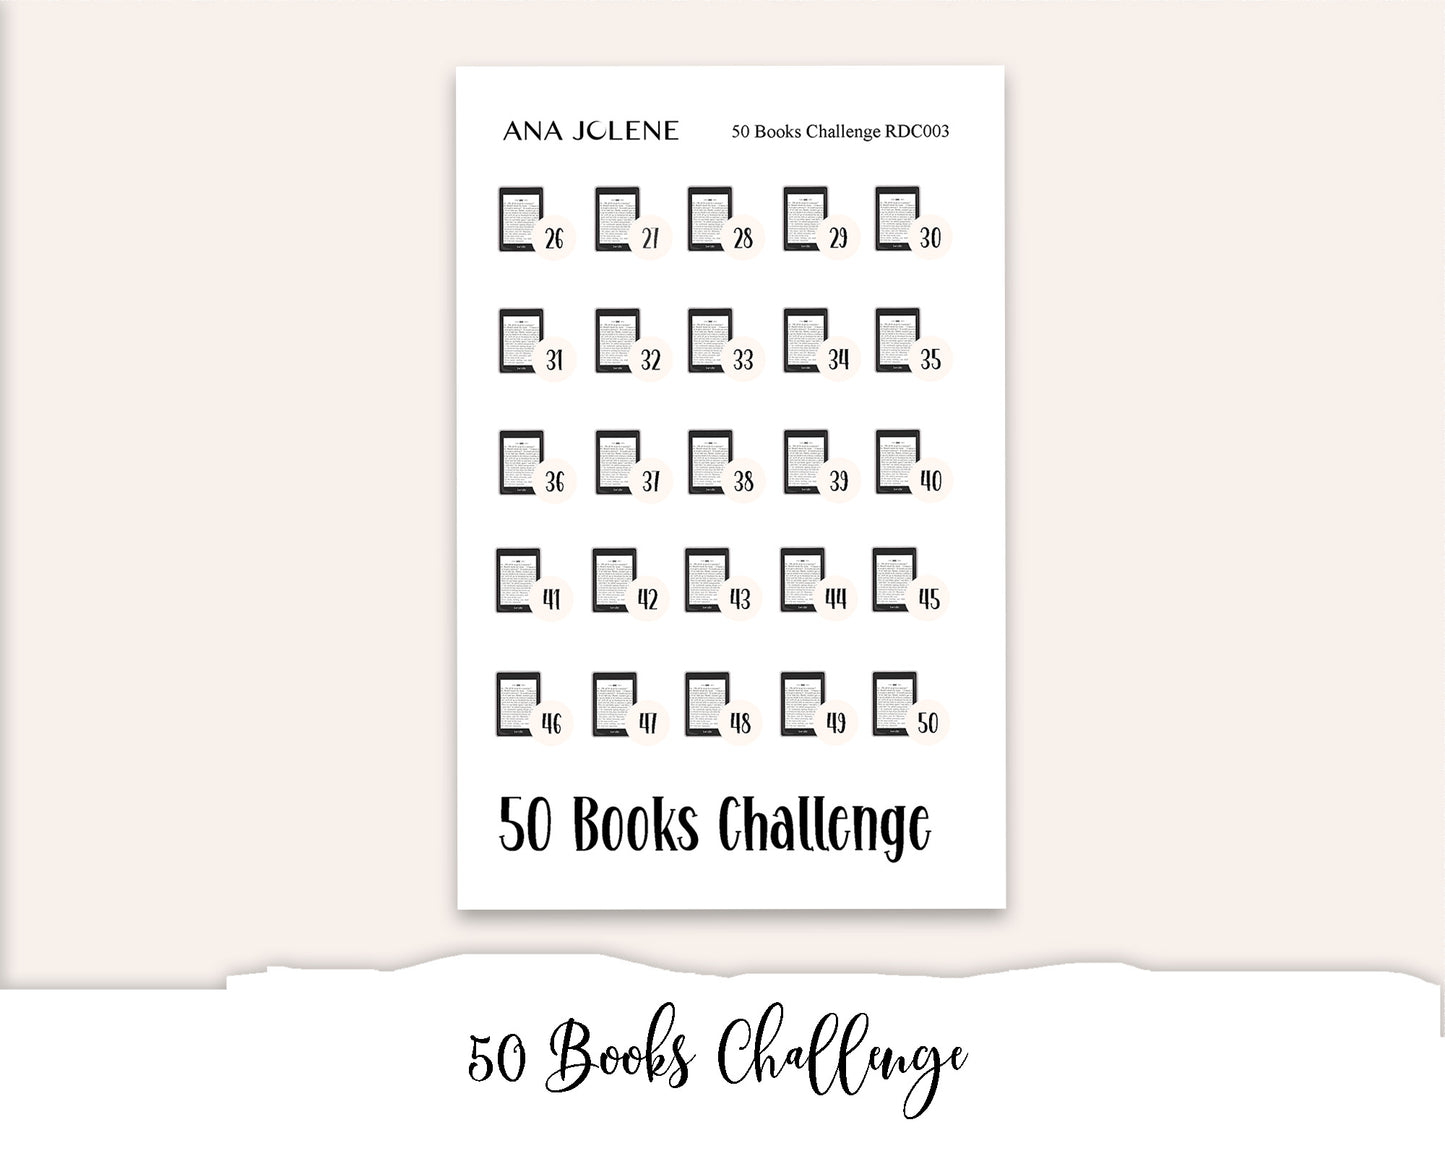 25-100 Books Challenge - A5 Reading Journal